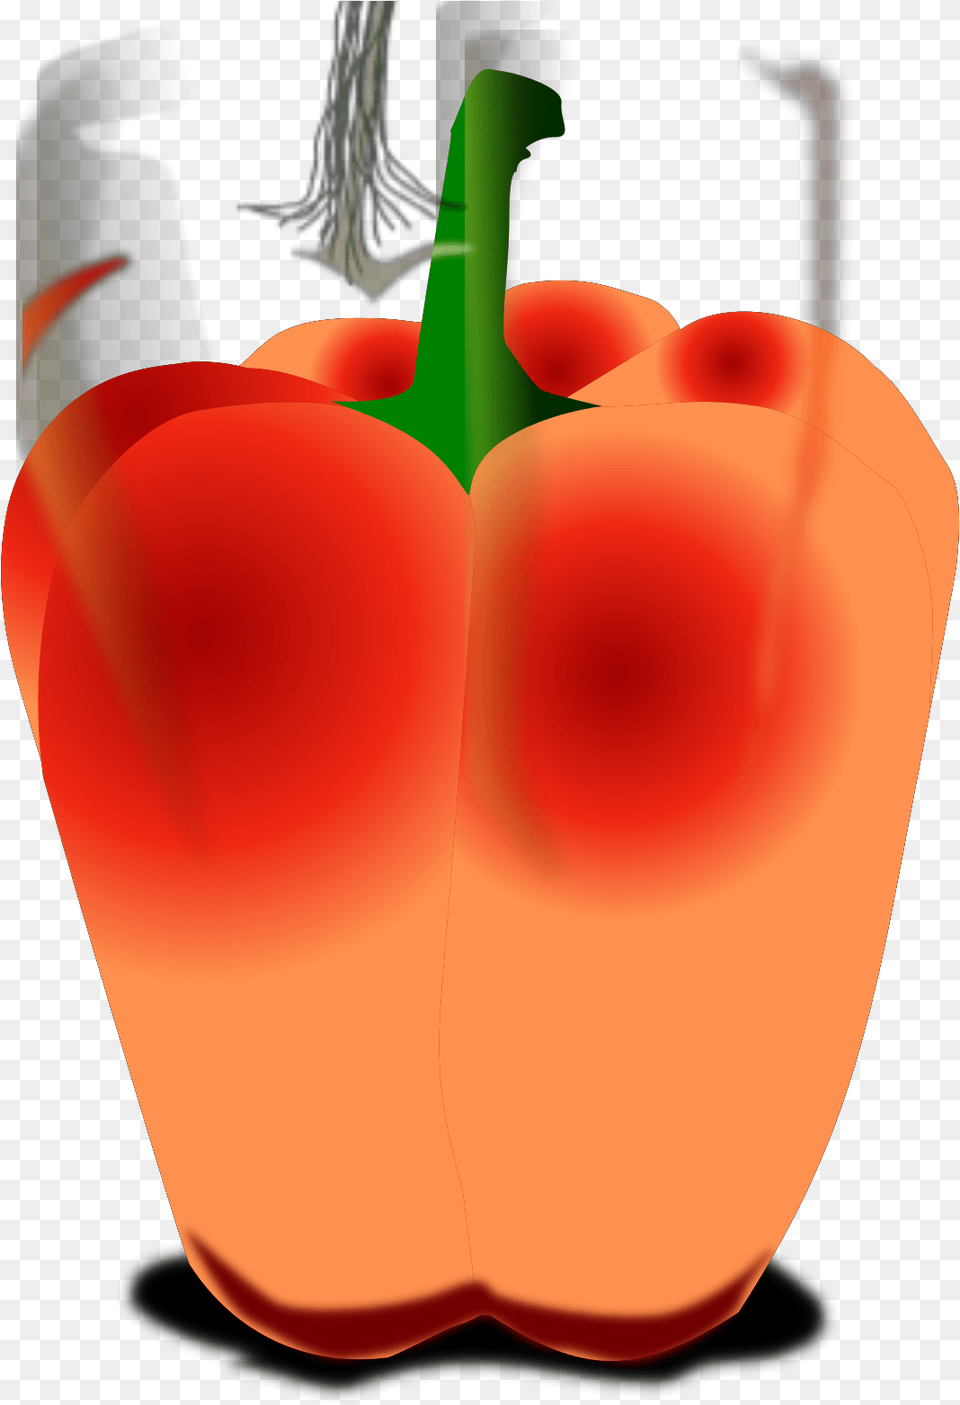 Red Bell Pepper, Food, Produce, Plant, Vegetable Png Image